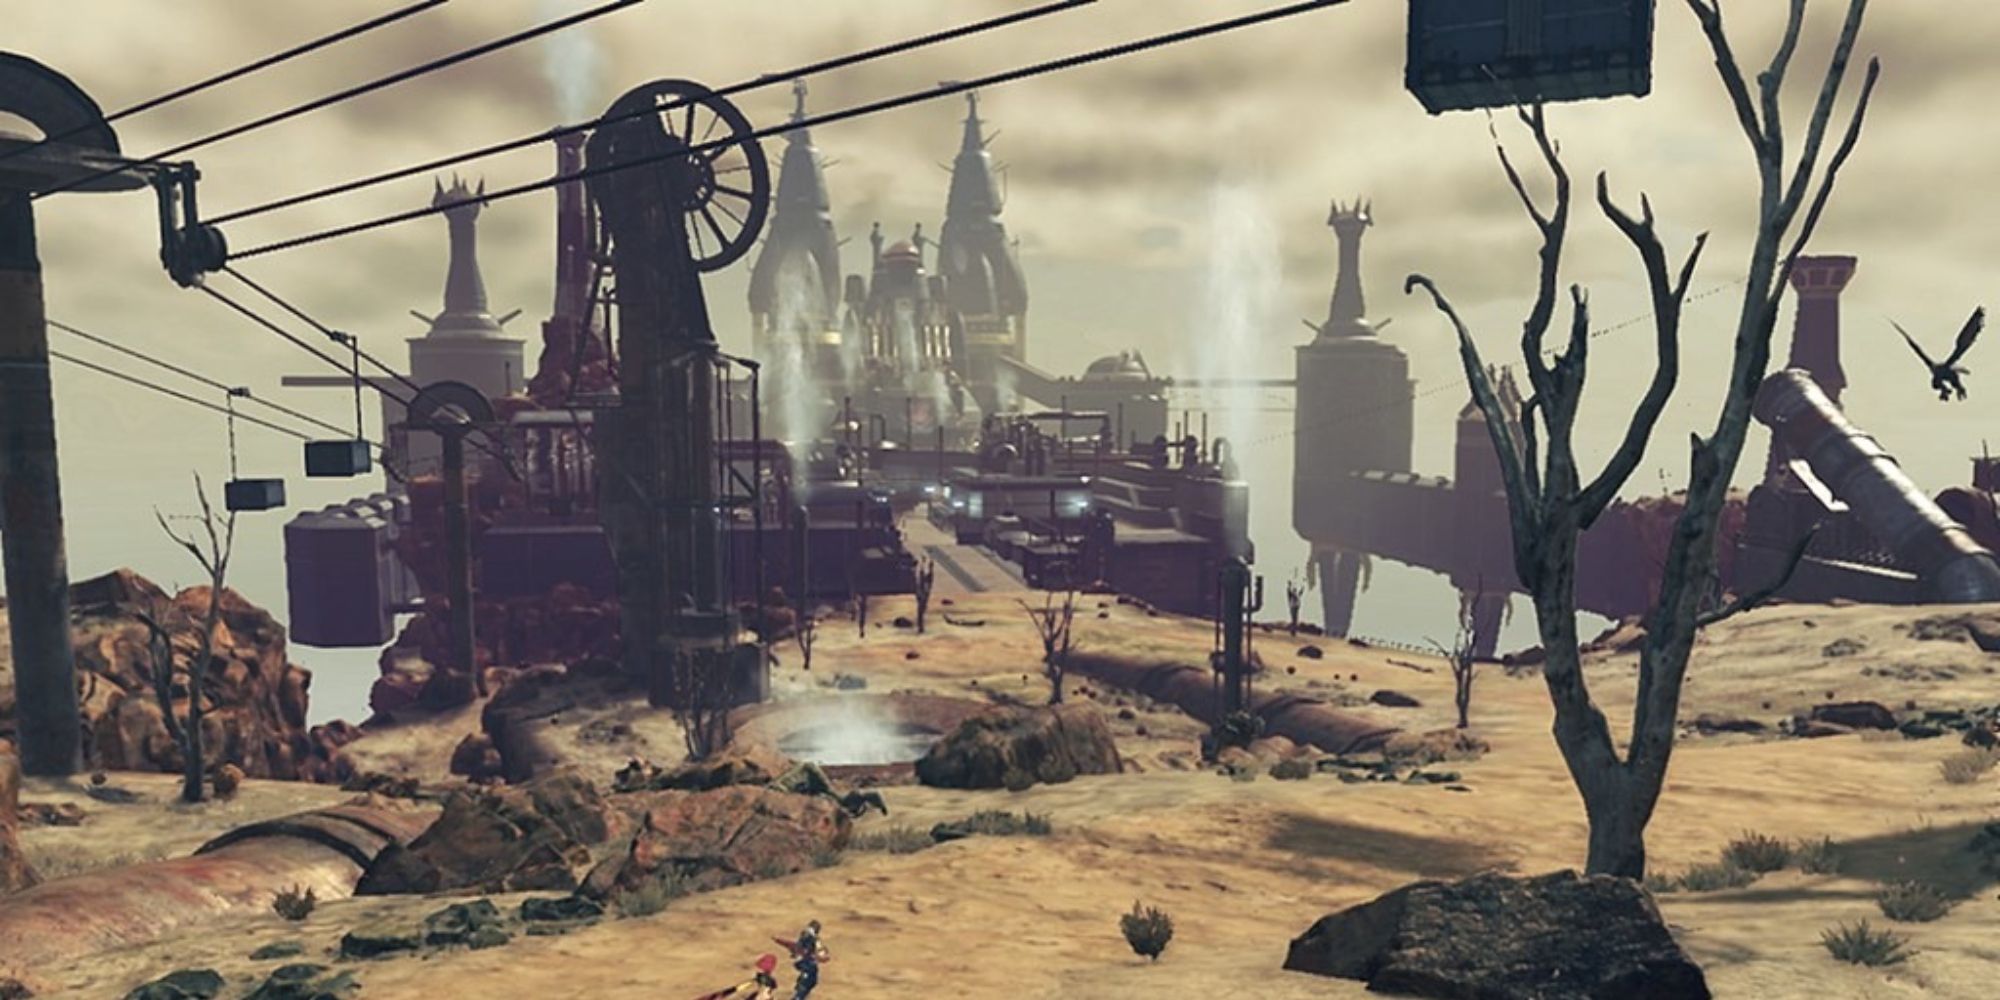 Xenoblade Chronicles 2 Locations a wide overhead shot of the desert-themed titan Mor Ardain with vairous metallic structures scattered across and the city of Alba Cavanich in the distance